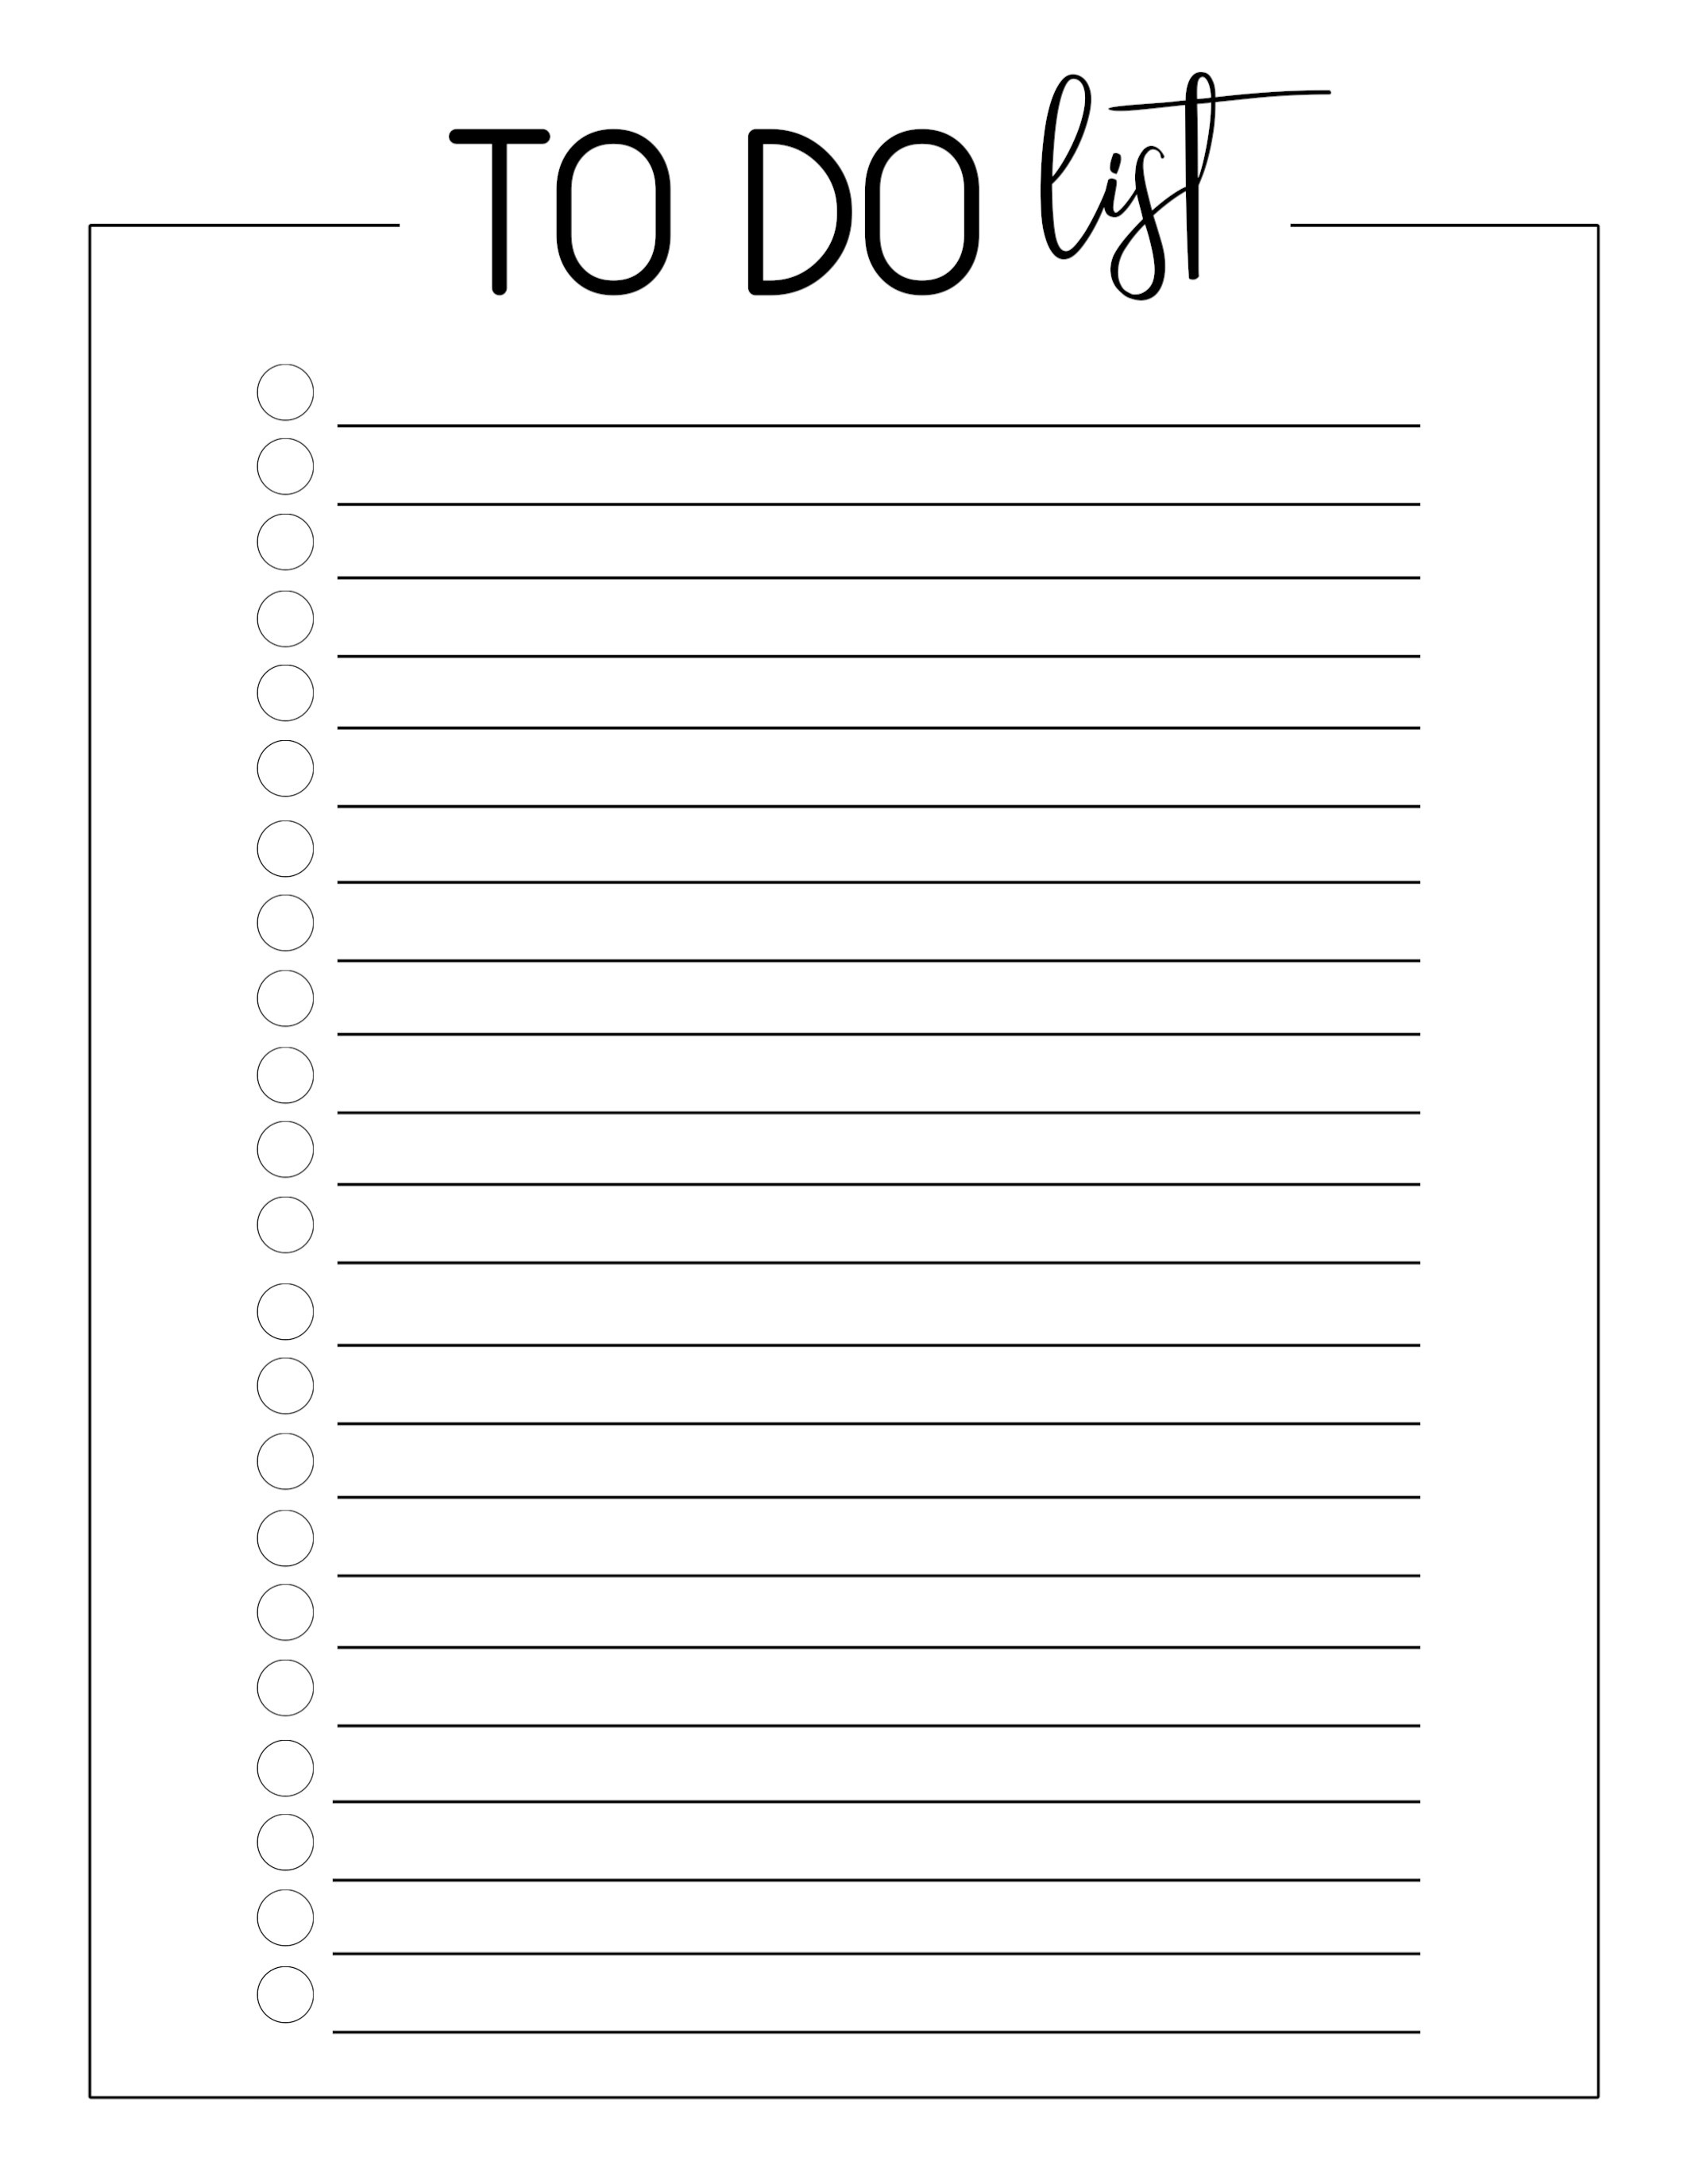 40 Printable To Do List Templates Kittybabylove To Do Template Free